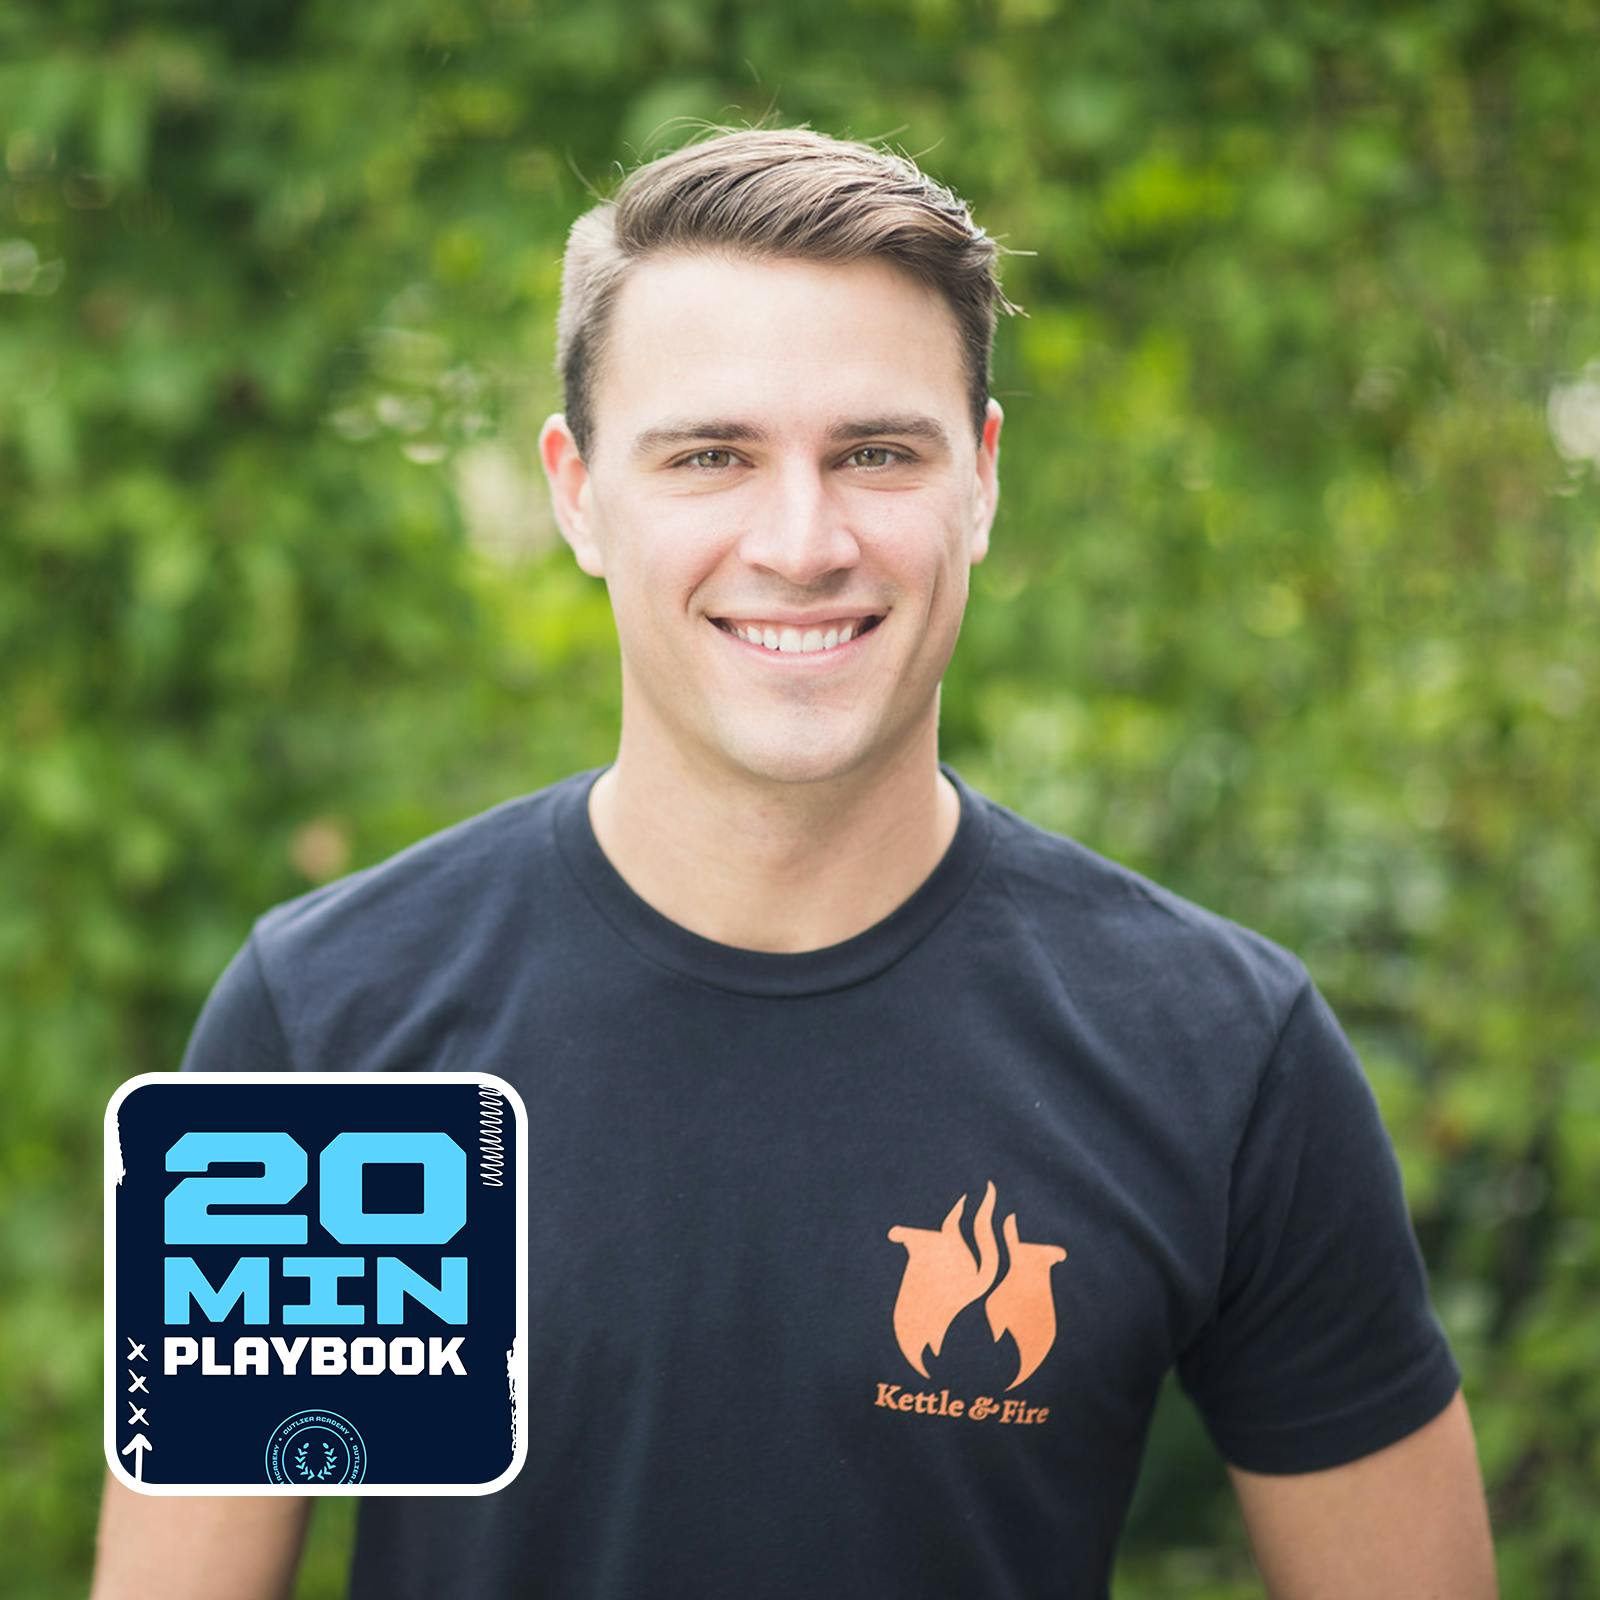 #143 Kettle & Fire's Justin Mares | Identifying Trends, 5-Minute Mini Workouts, 6 To Dos Per Day, Favorite Books, and More Image